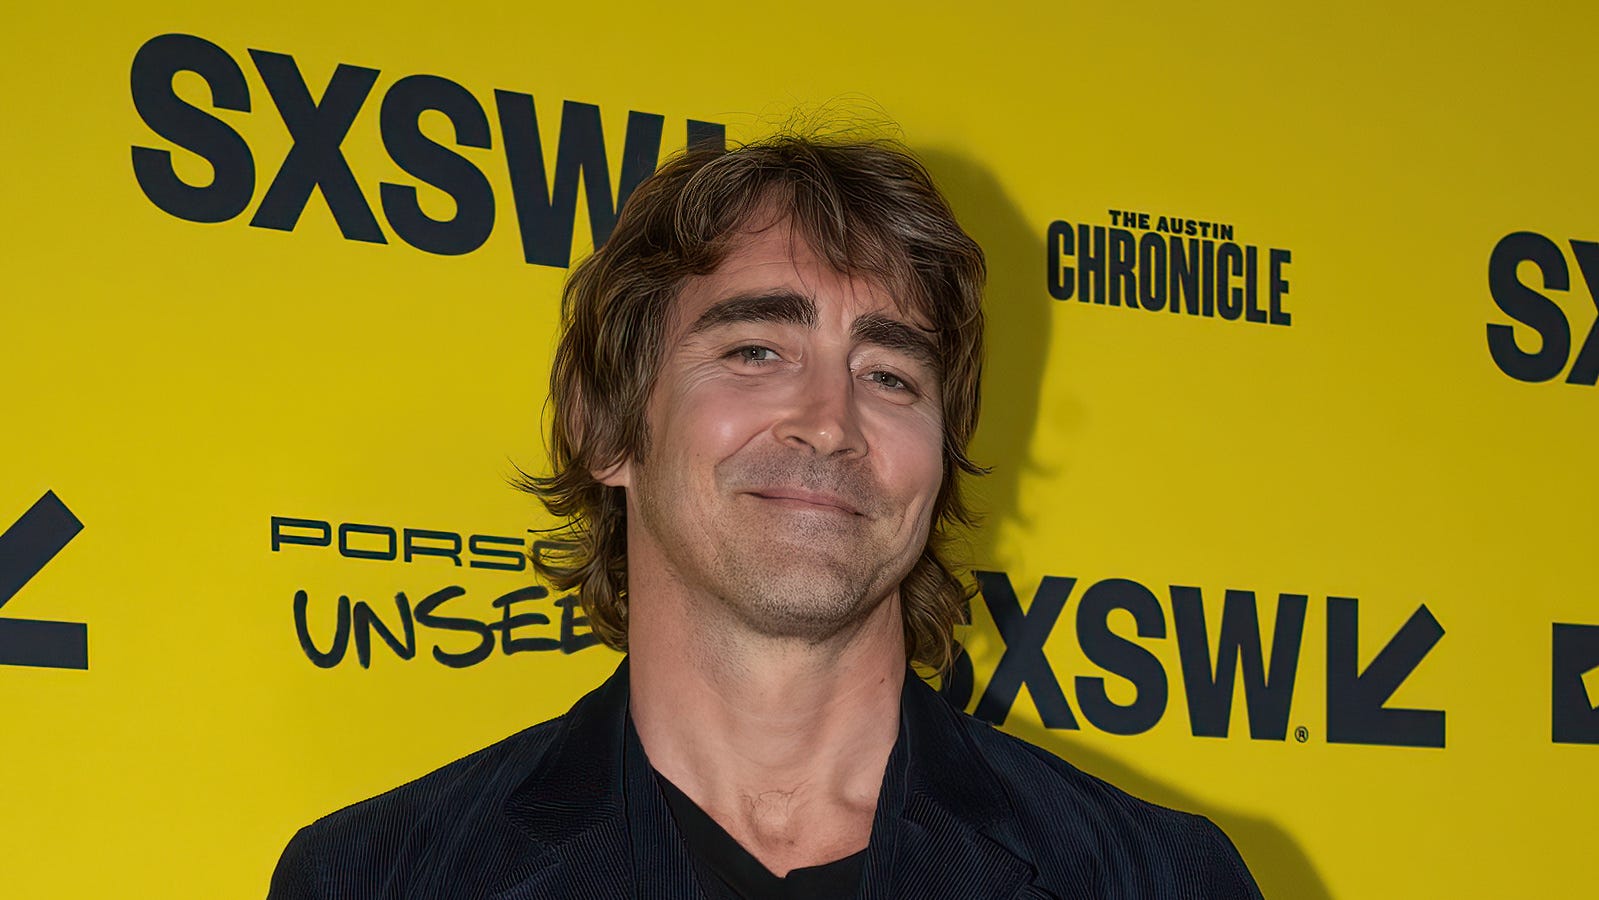 Lee Pace at SXSW in Austin sends support to transgender youth